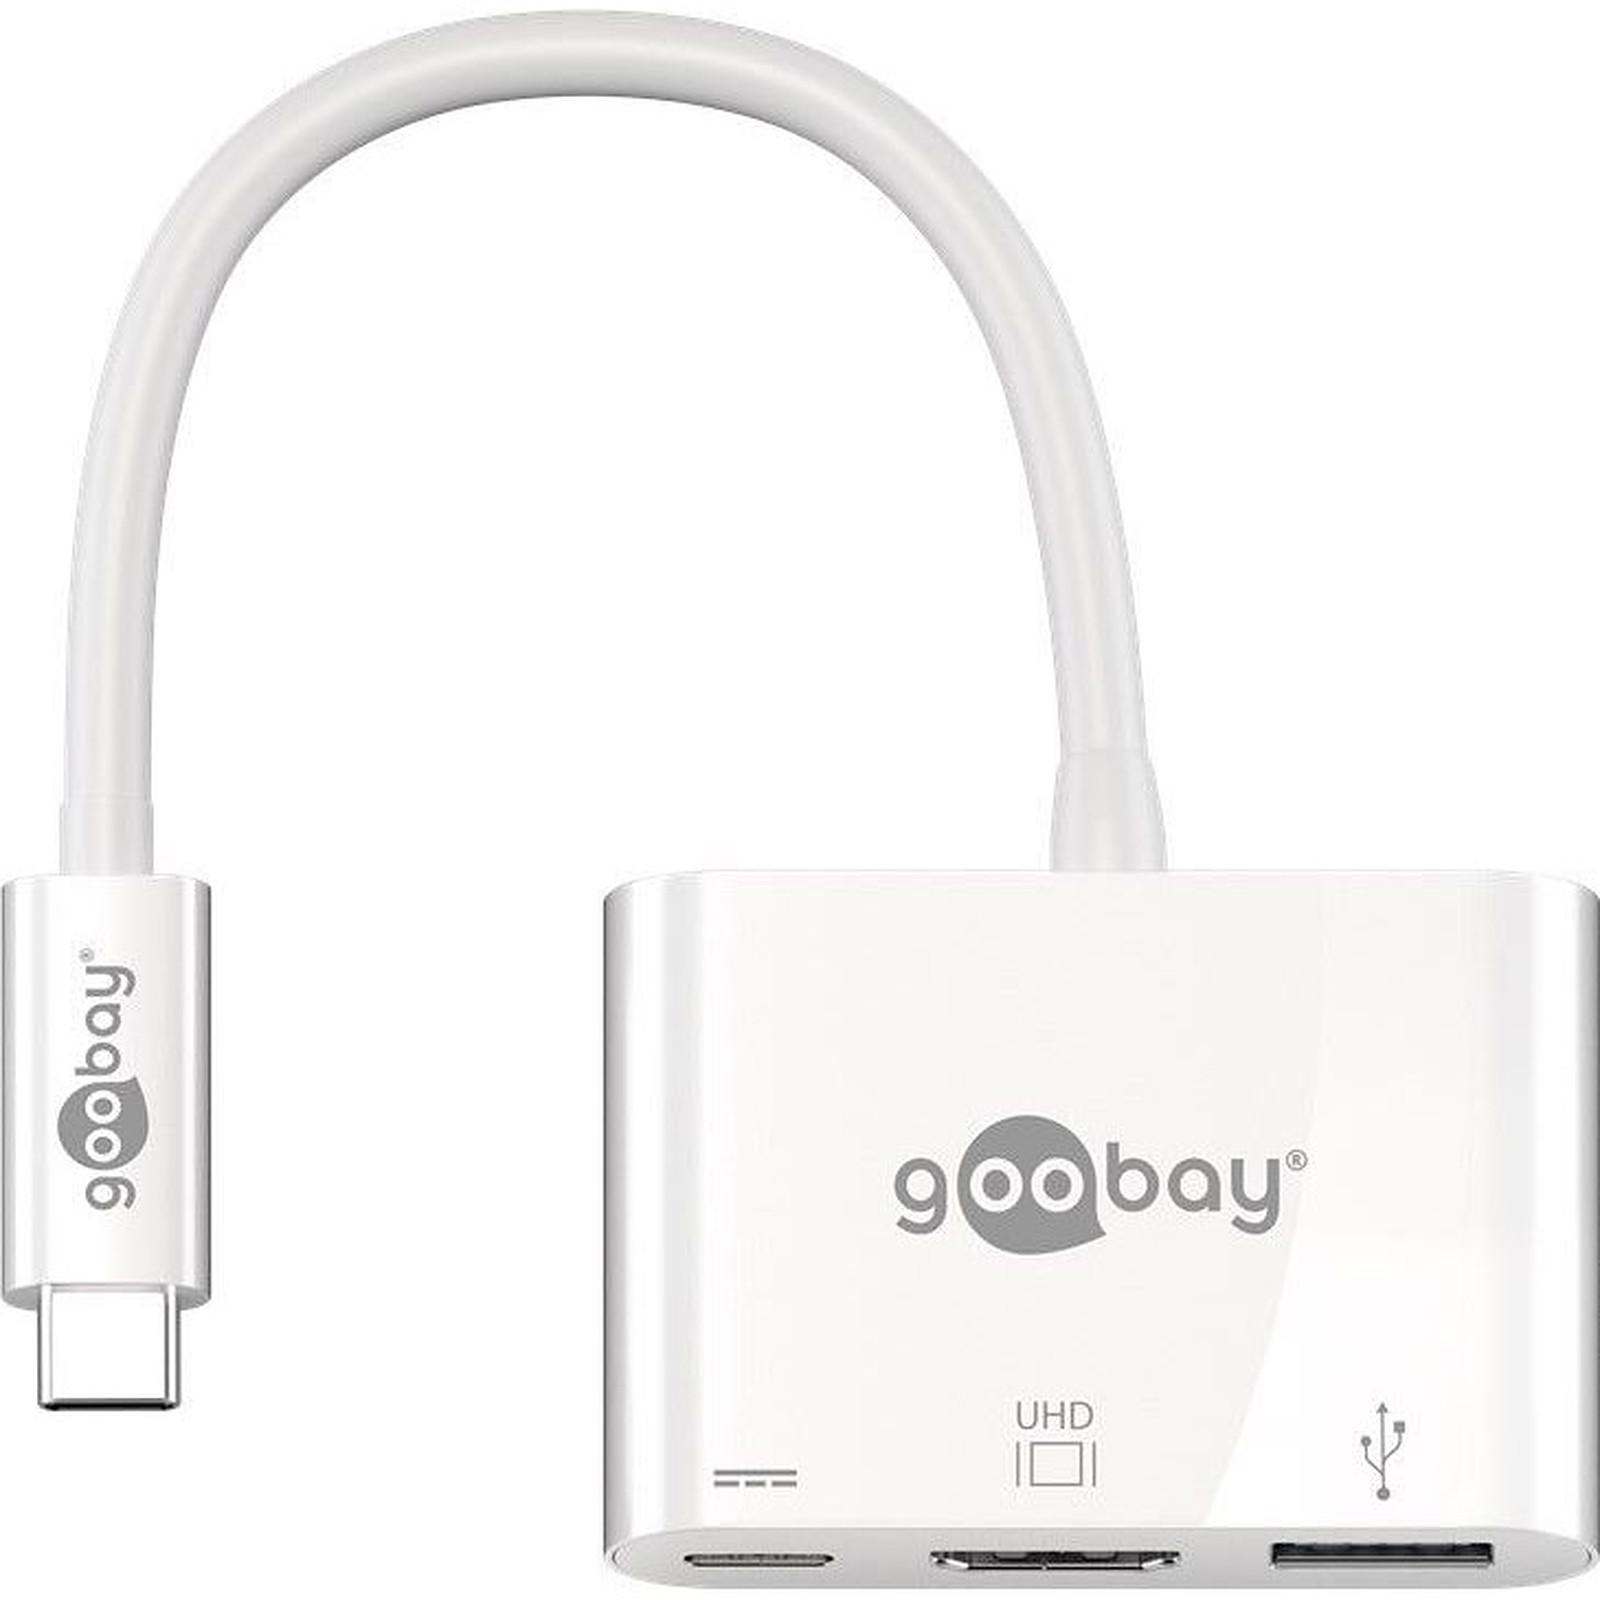 Goobay USB-C Multiport Adapter - Station d'accueil PC portable Goobay